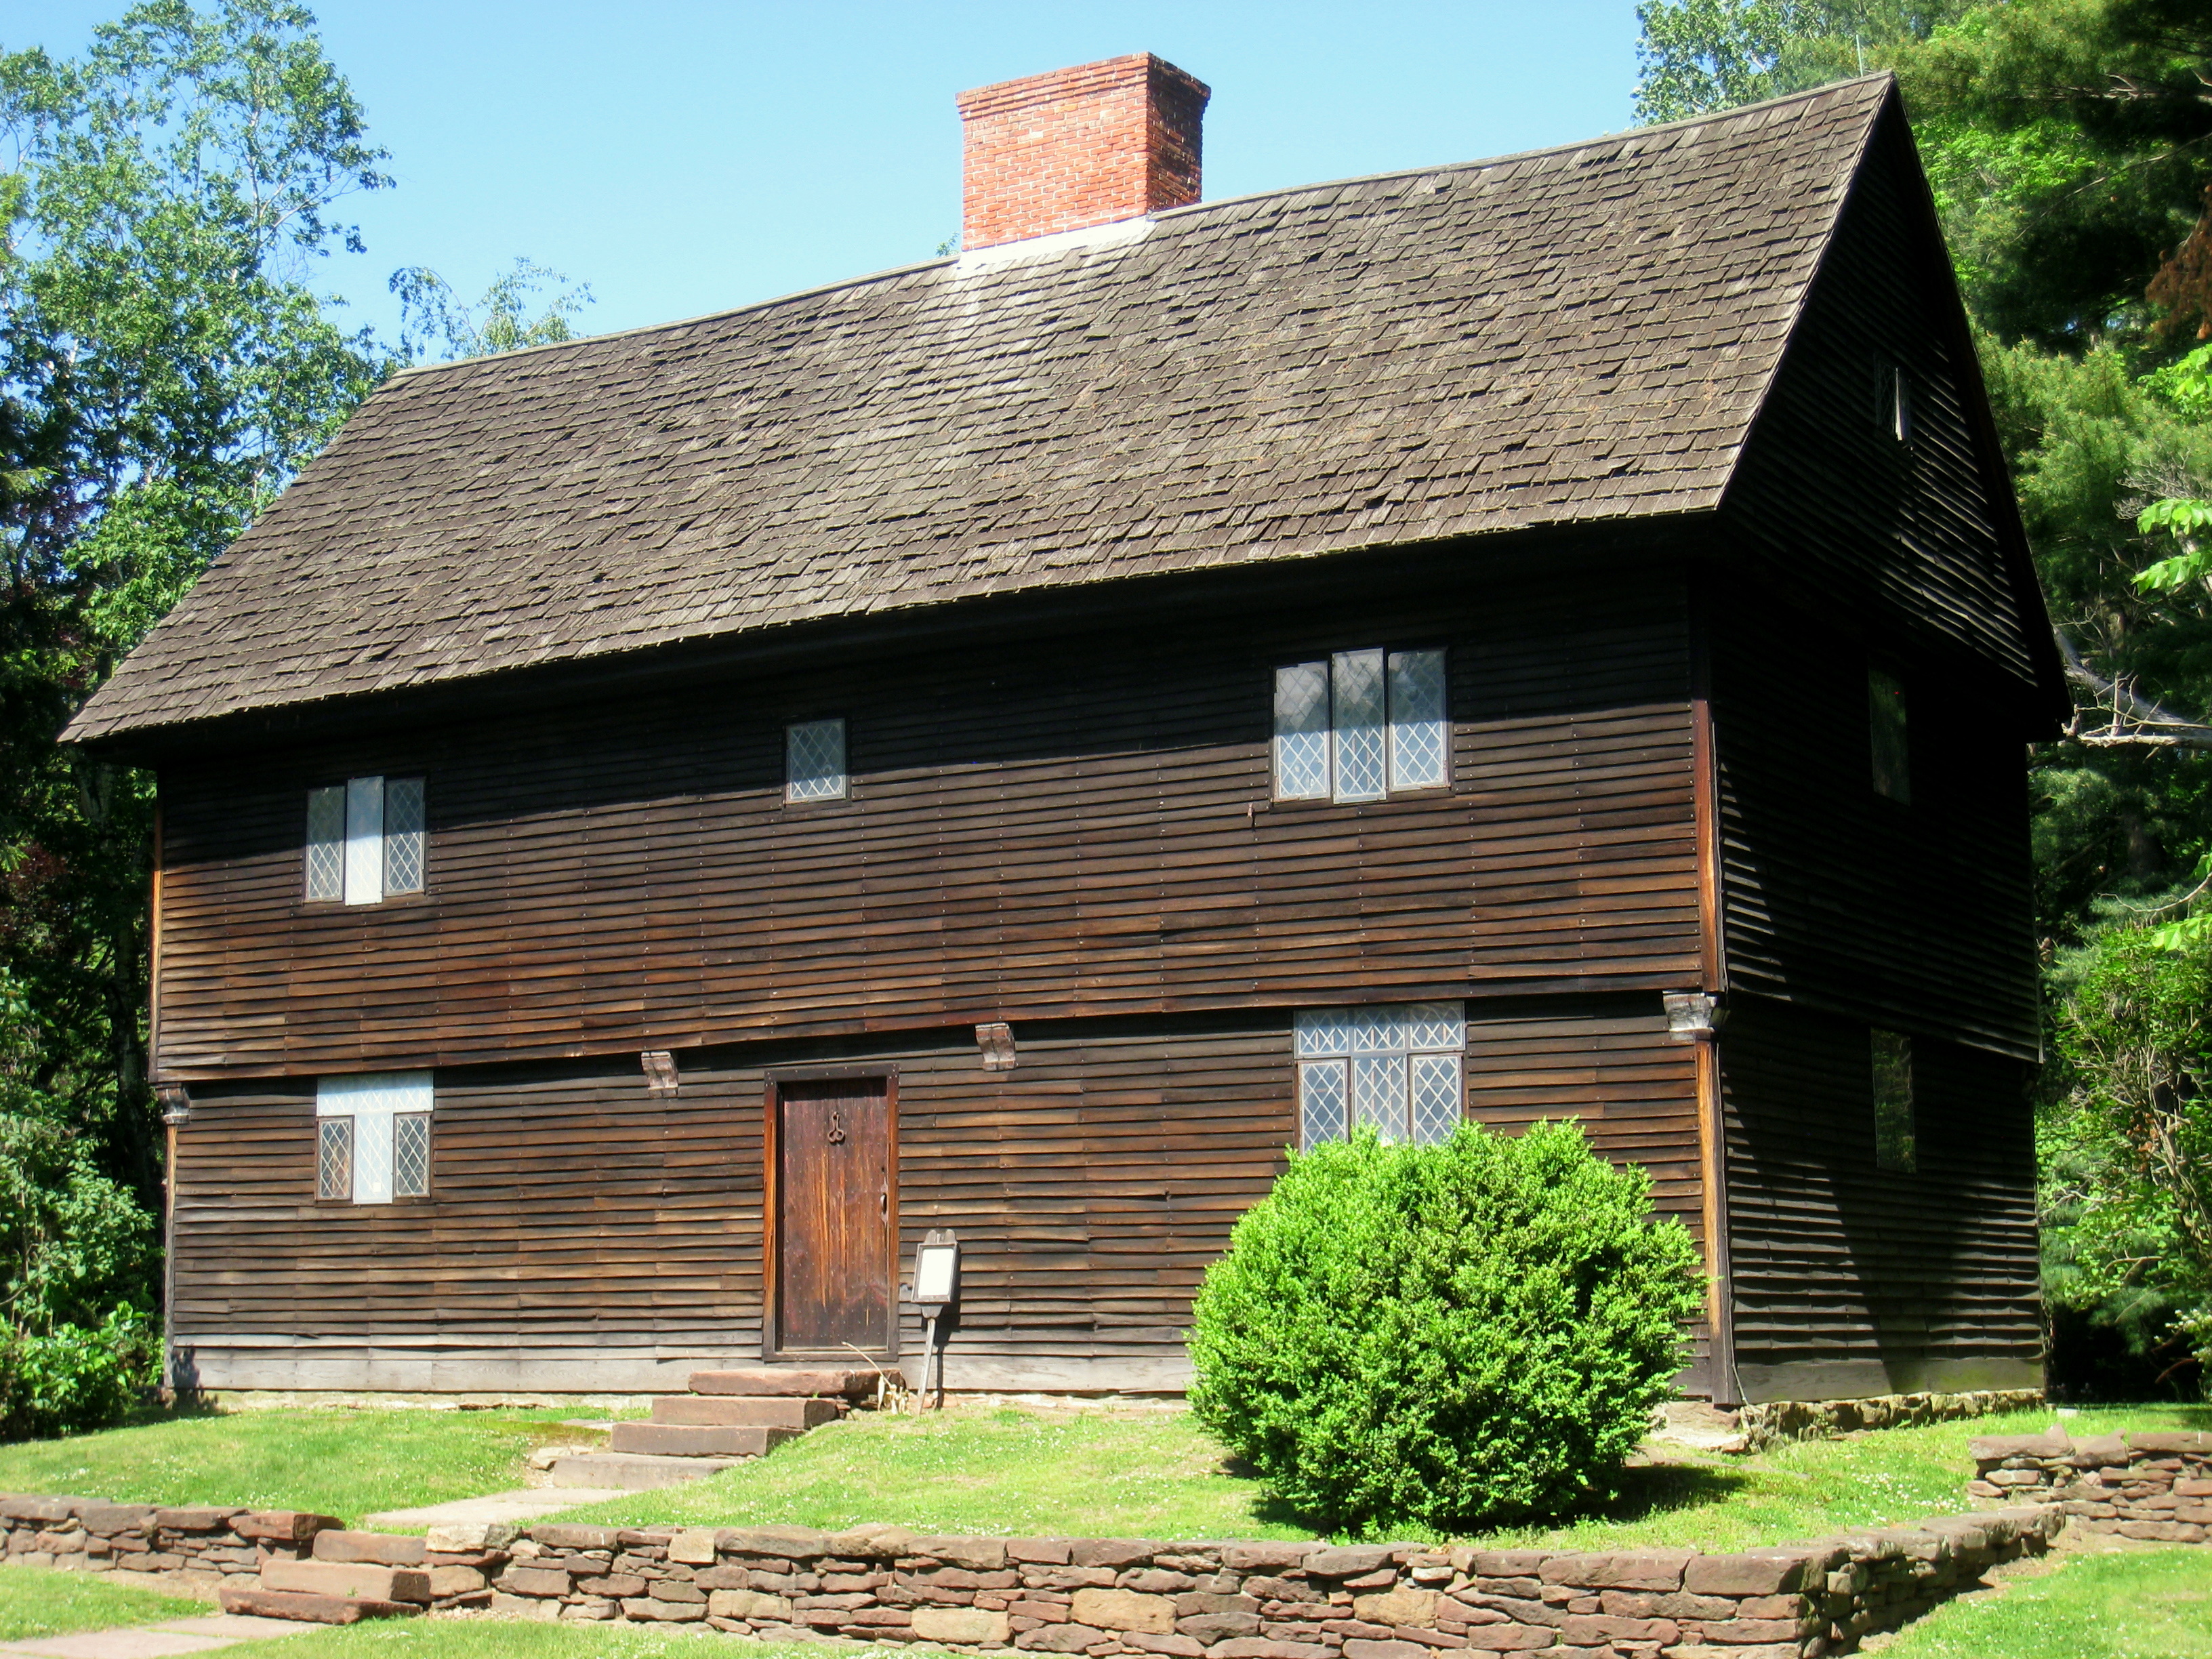 Recent research has revealed that the Buttolph-Williams House was constructed about 20 years later than originally thought.